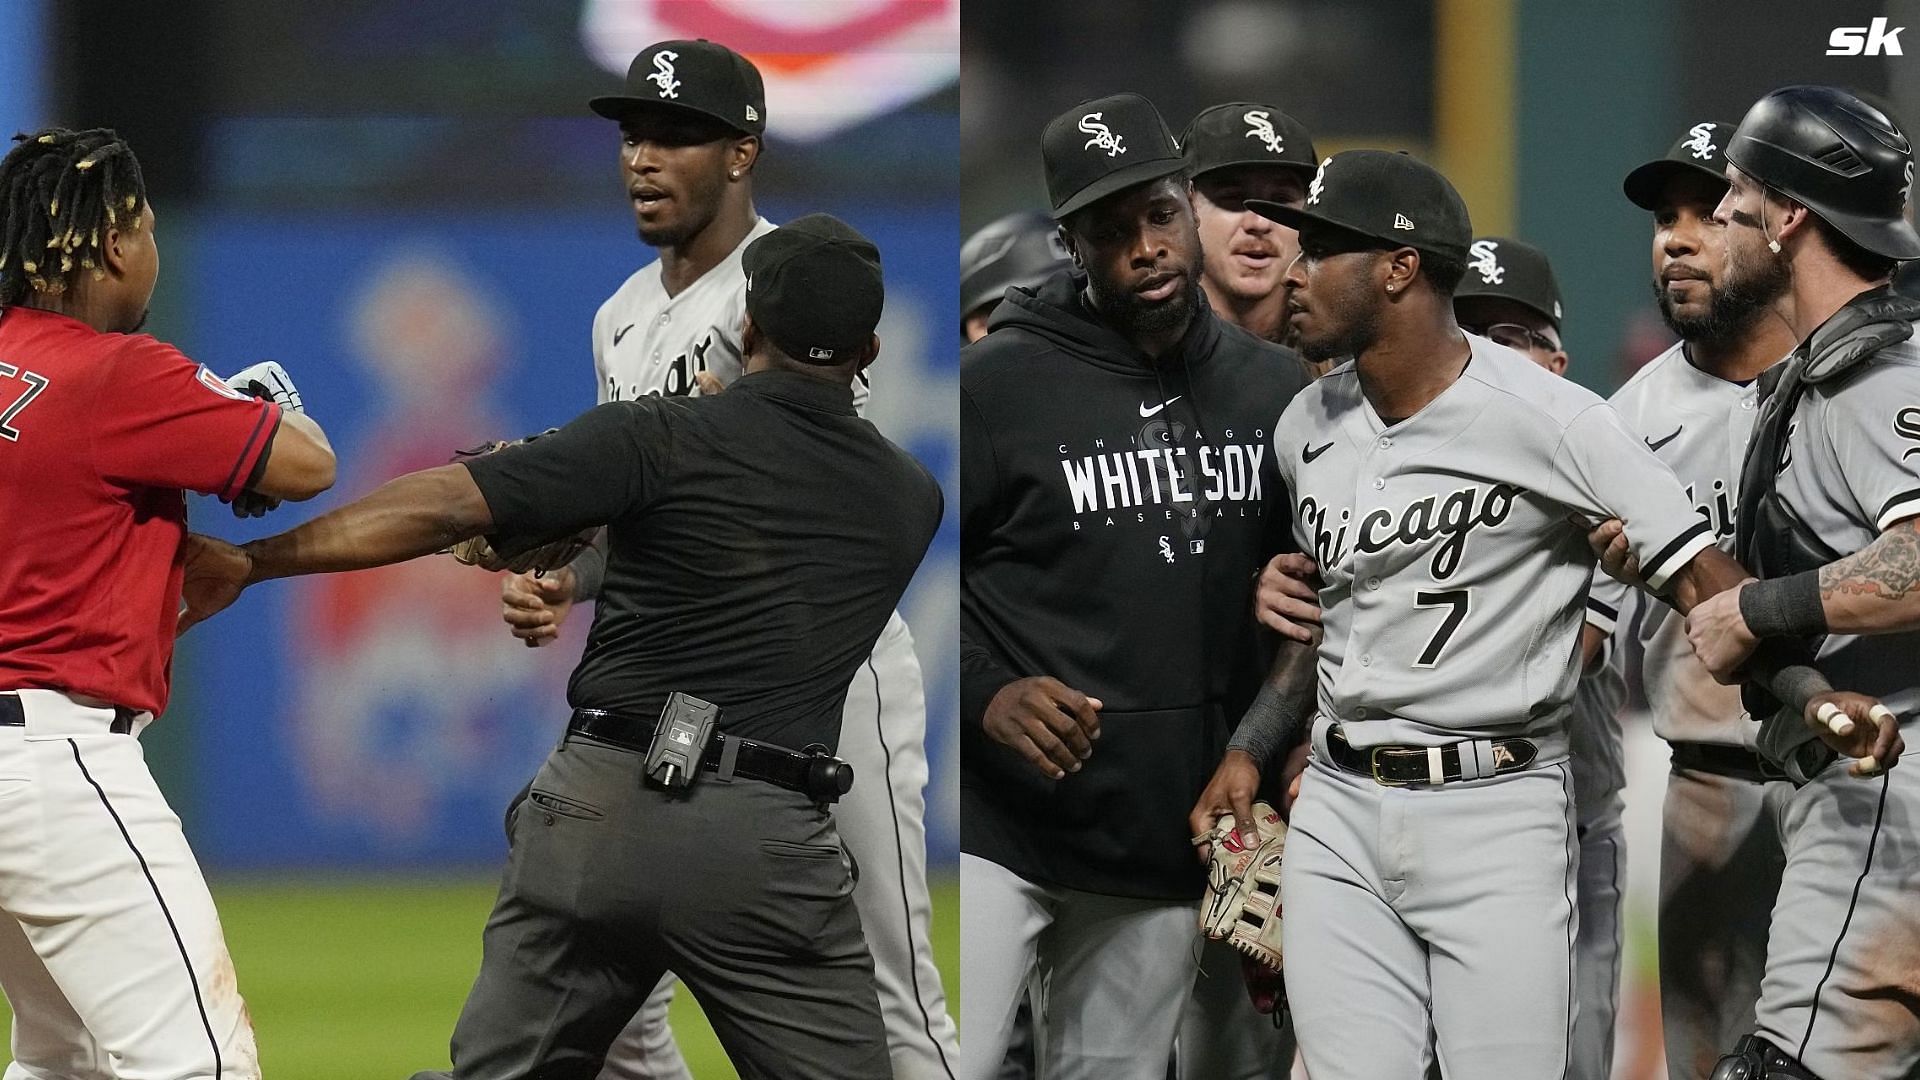 Tim Anderson went on a barrage of cryptic tweets clearly circling around the incident with Jose Ramirez